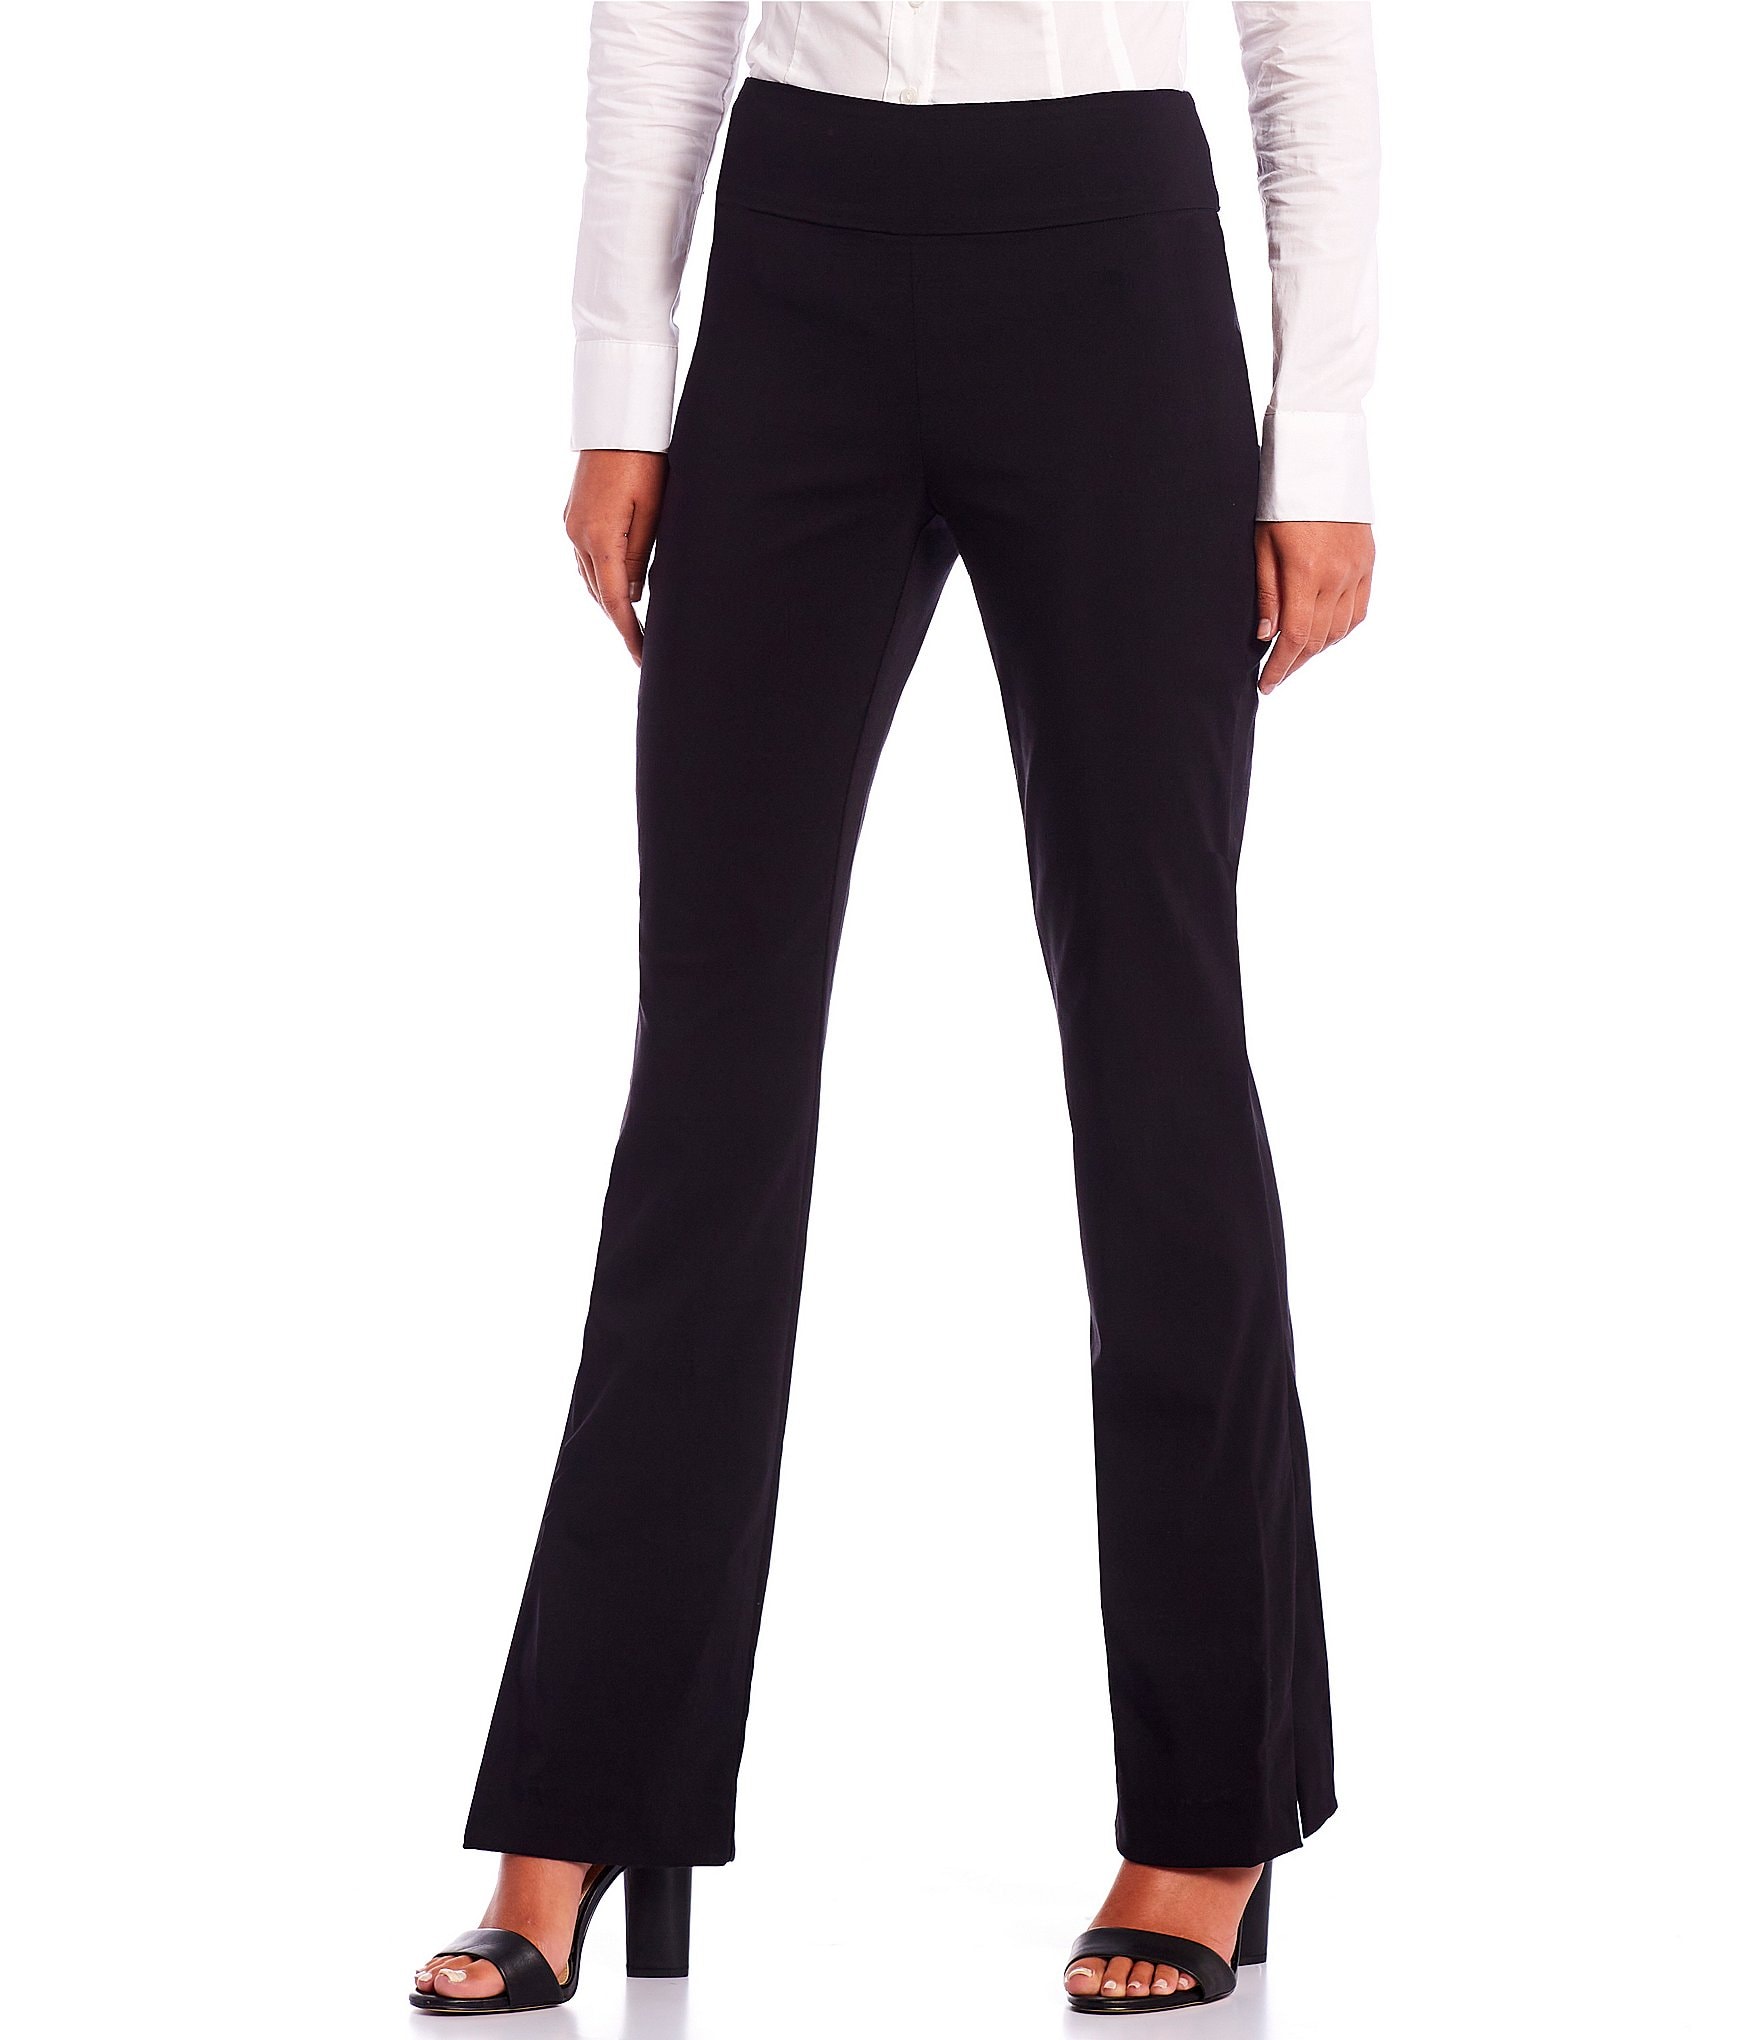 Up To 55% Off on Bootcut Dress Pants for Women